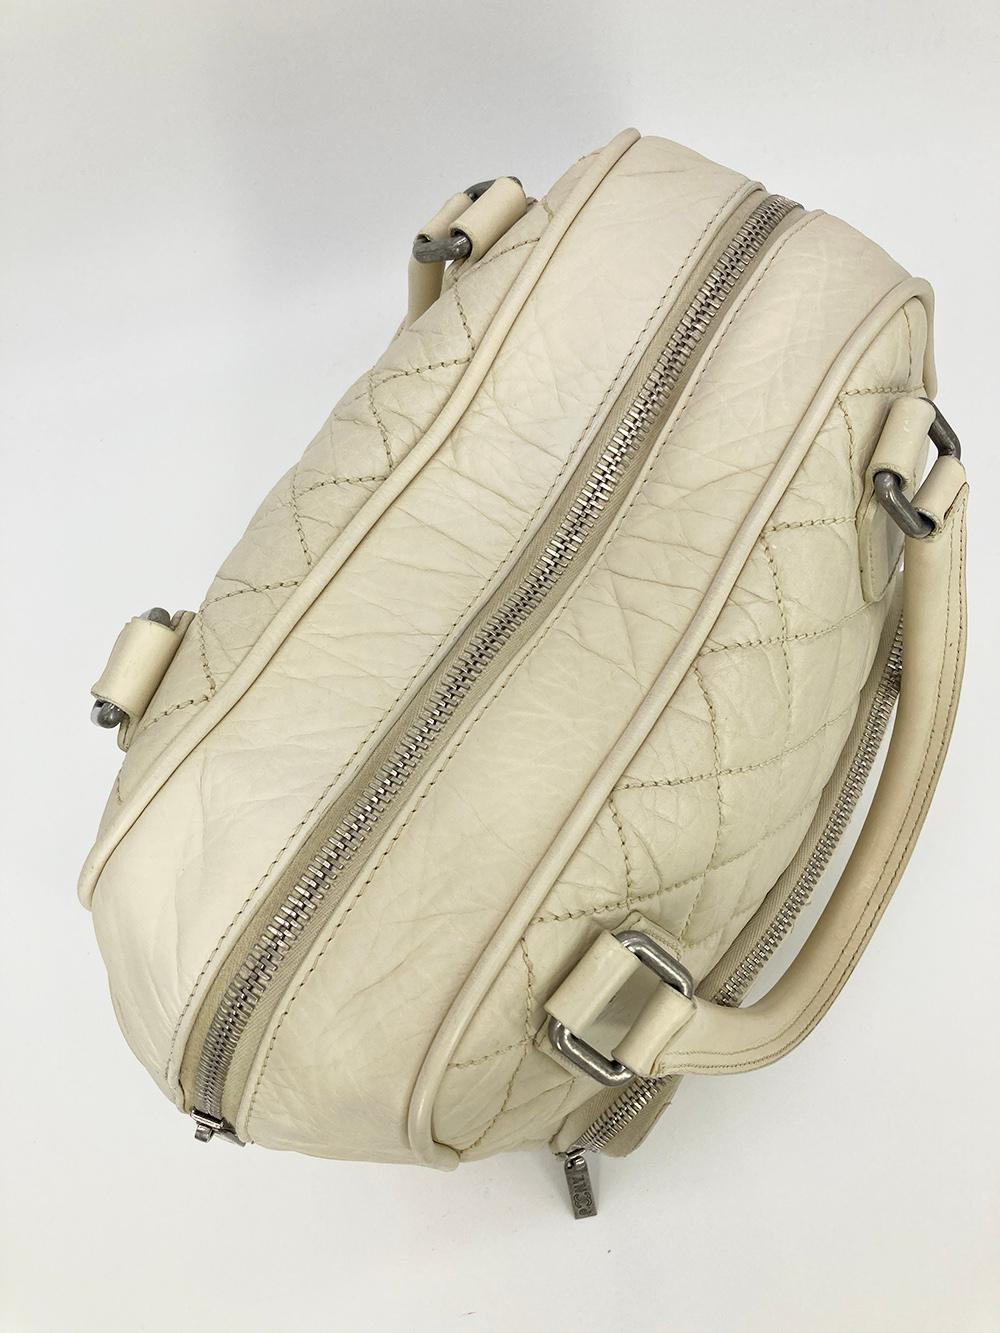 Chanel Paris New York Cream Distressed Bowling Tote For Sale 4